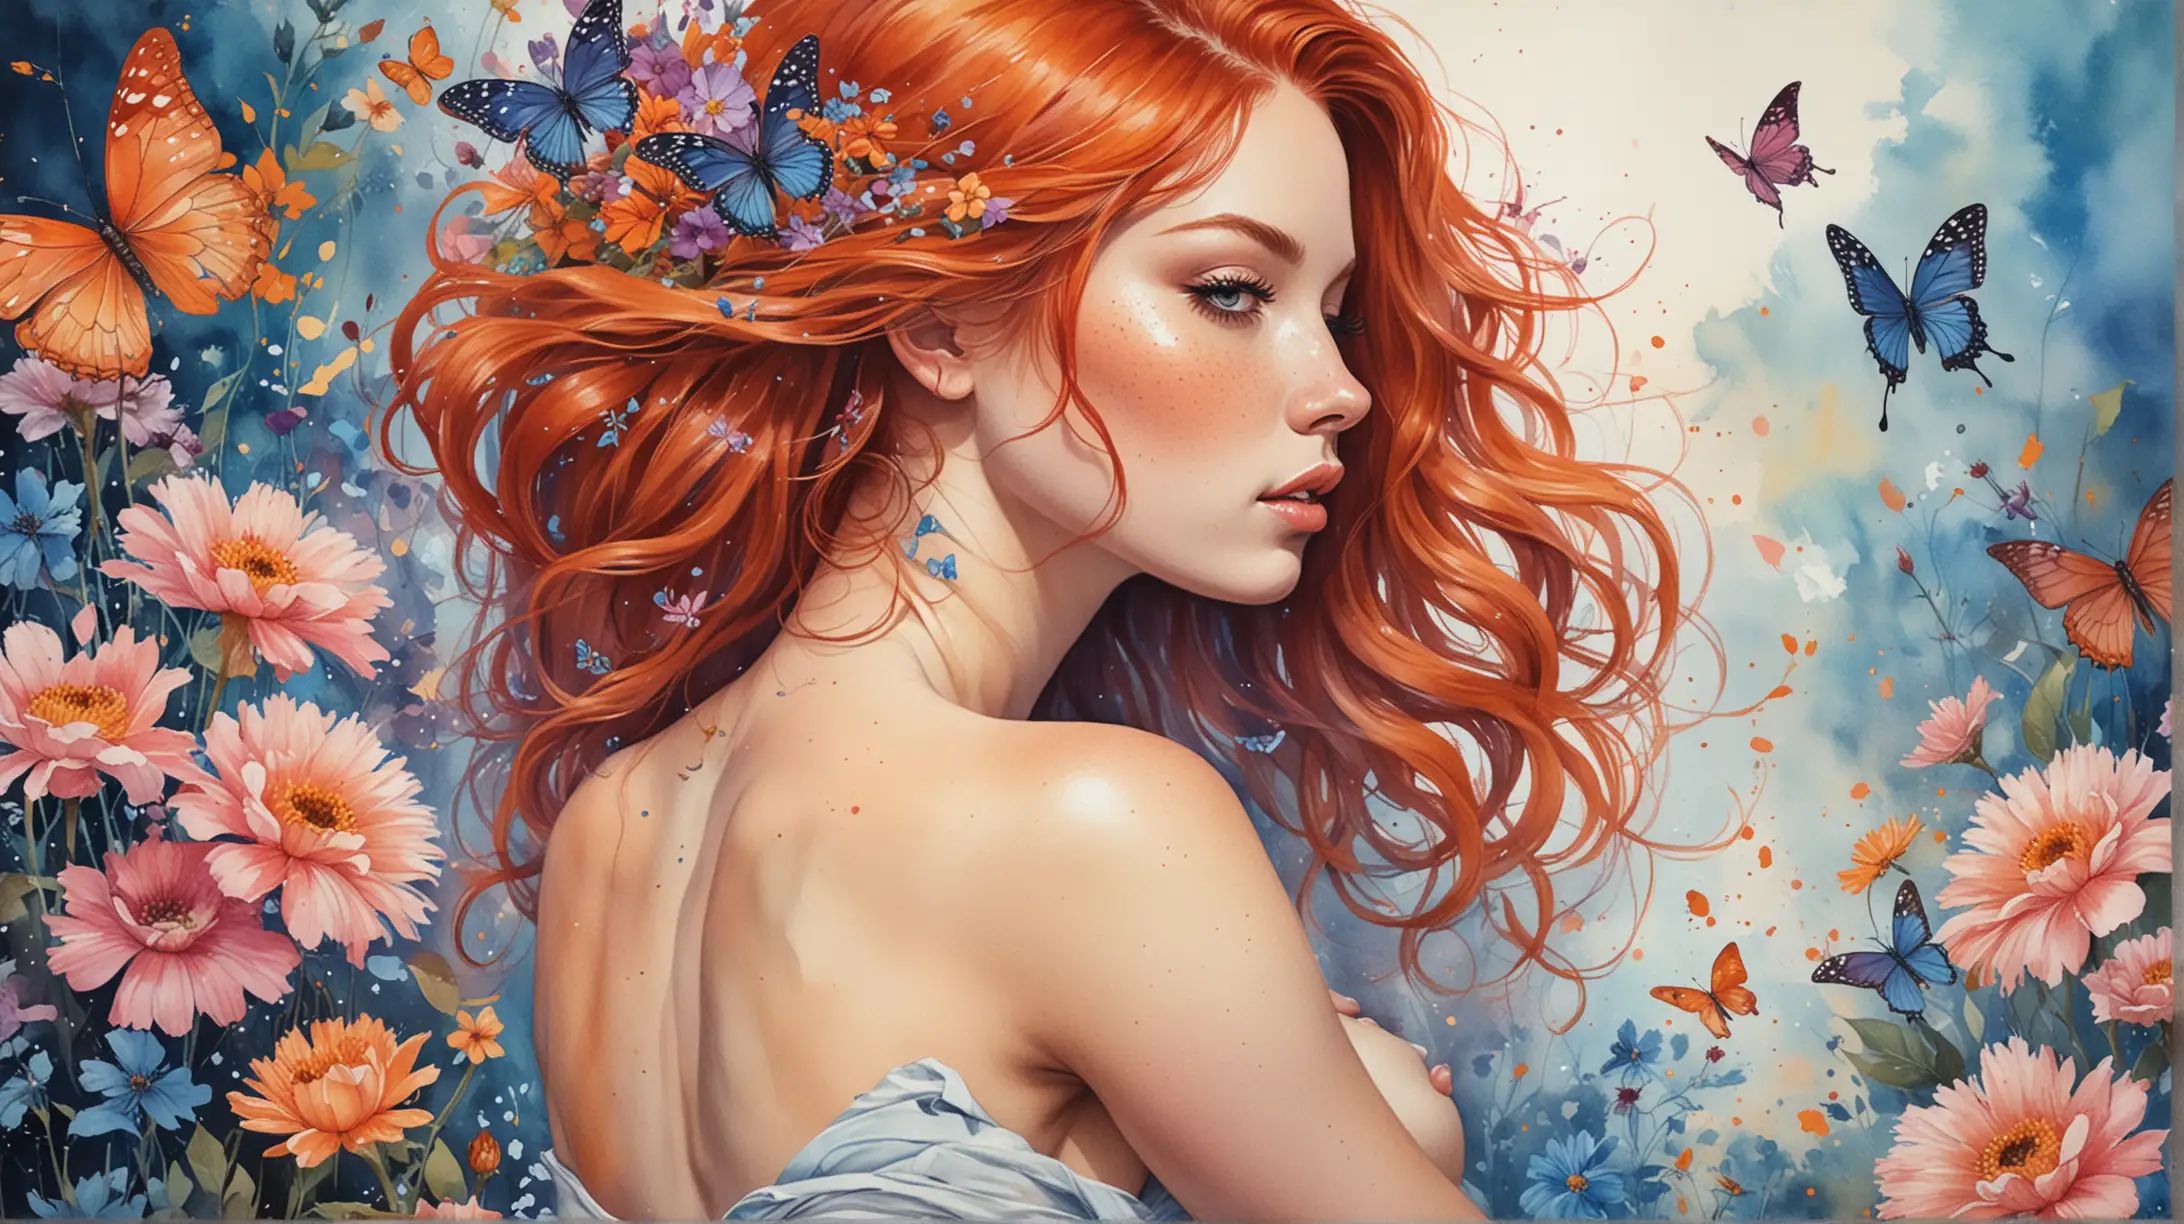 This is an artwork depicting a side profile of an unclothed beutiful redhair woman sitting with her legs pulled close. Her hair is a magnificent array of flowers and butterflies, blending into a colorful background with a watercolor effect. The colors are vibrant, featuring shades of blue, pink, orange, and splashes of black ink. The woman's features are finely detailed, with prominent eyelashes and hoop earrings, adding to the artwork's stylized aesthetic.